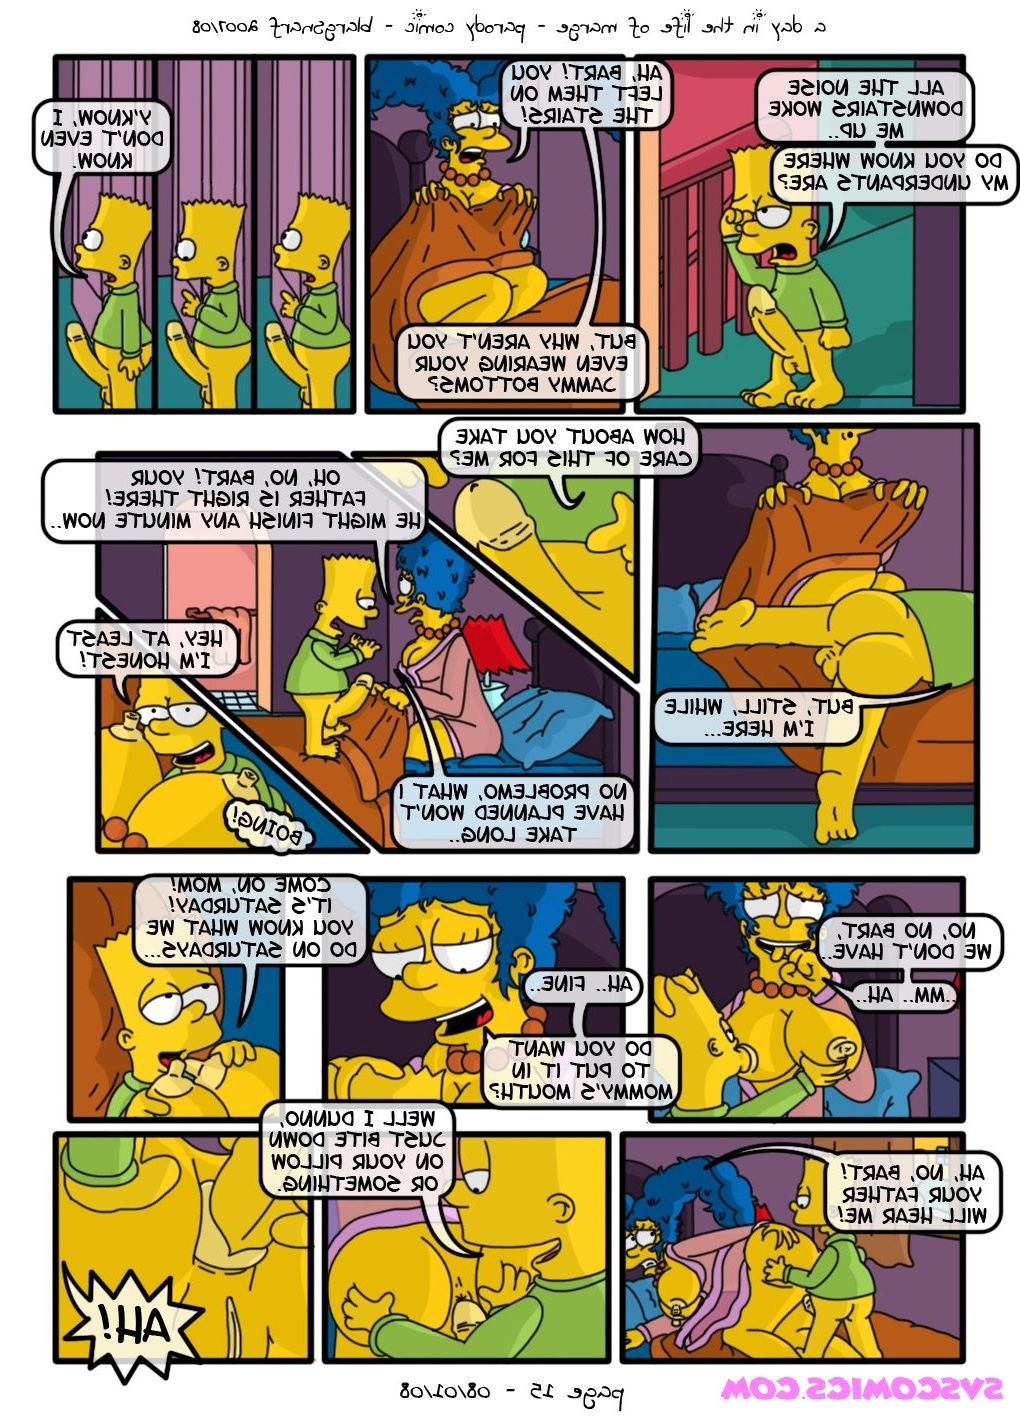 day-life-marge-simpsons image_9570.jpg